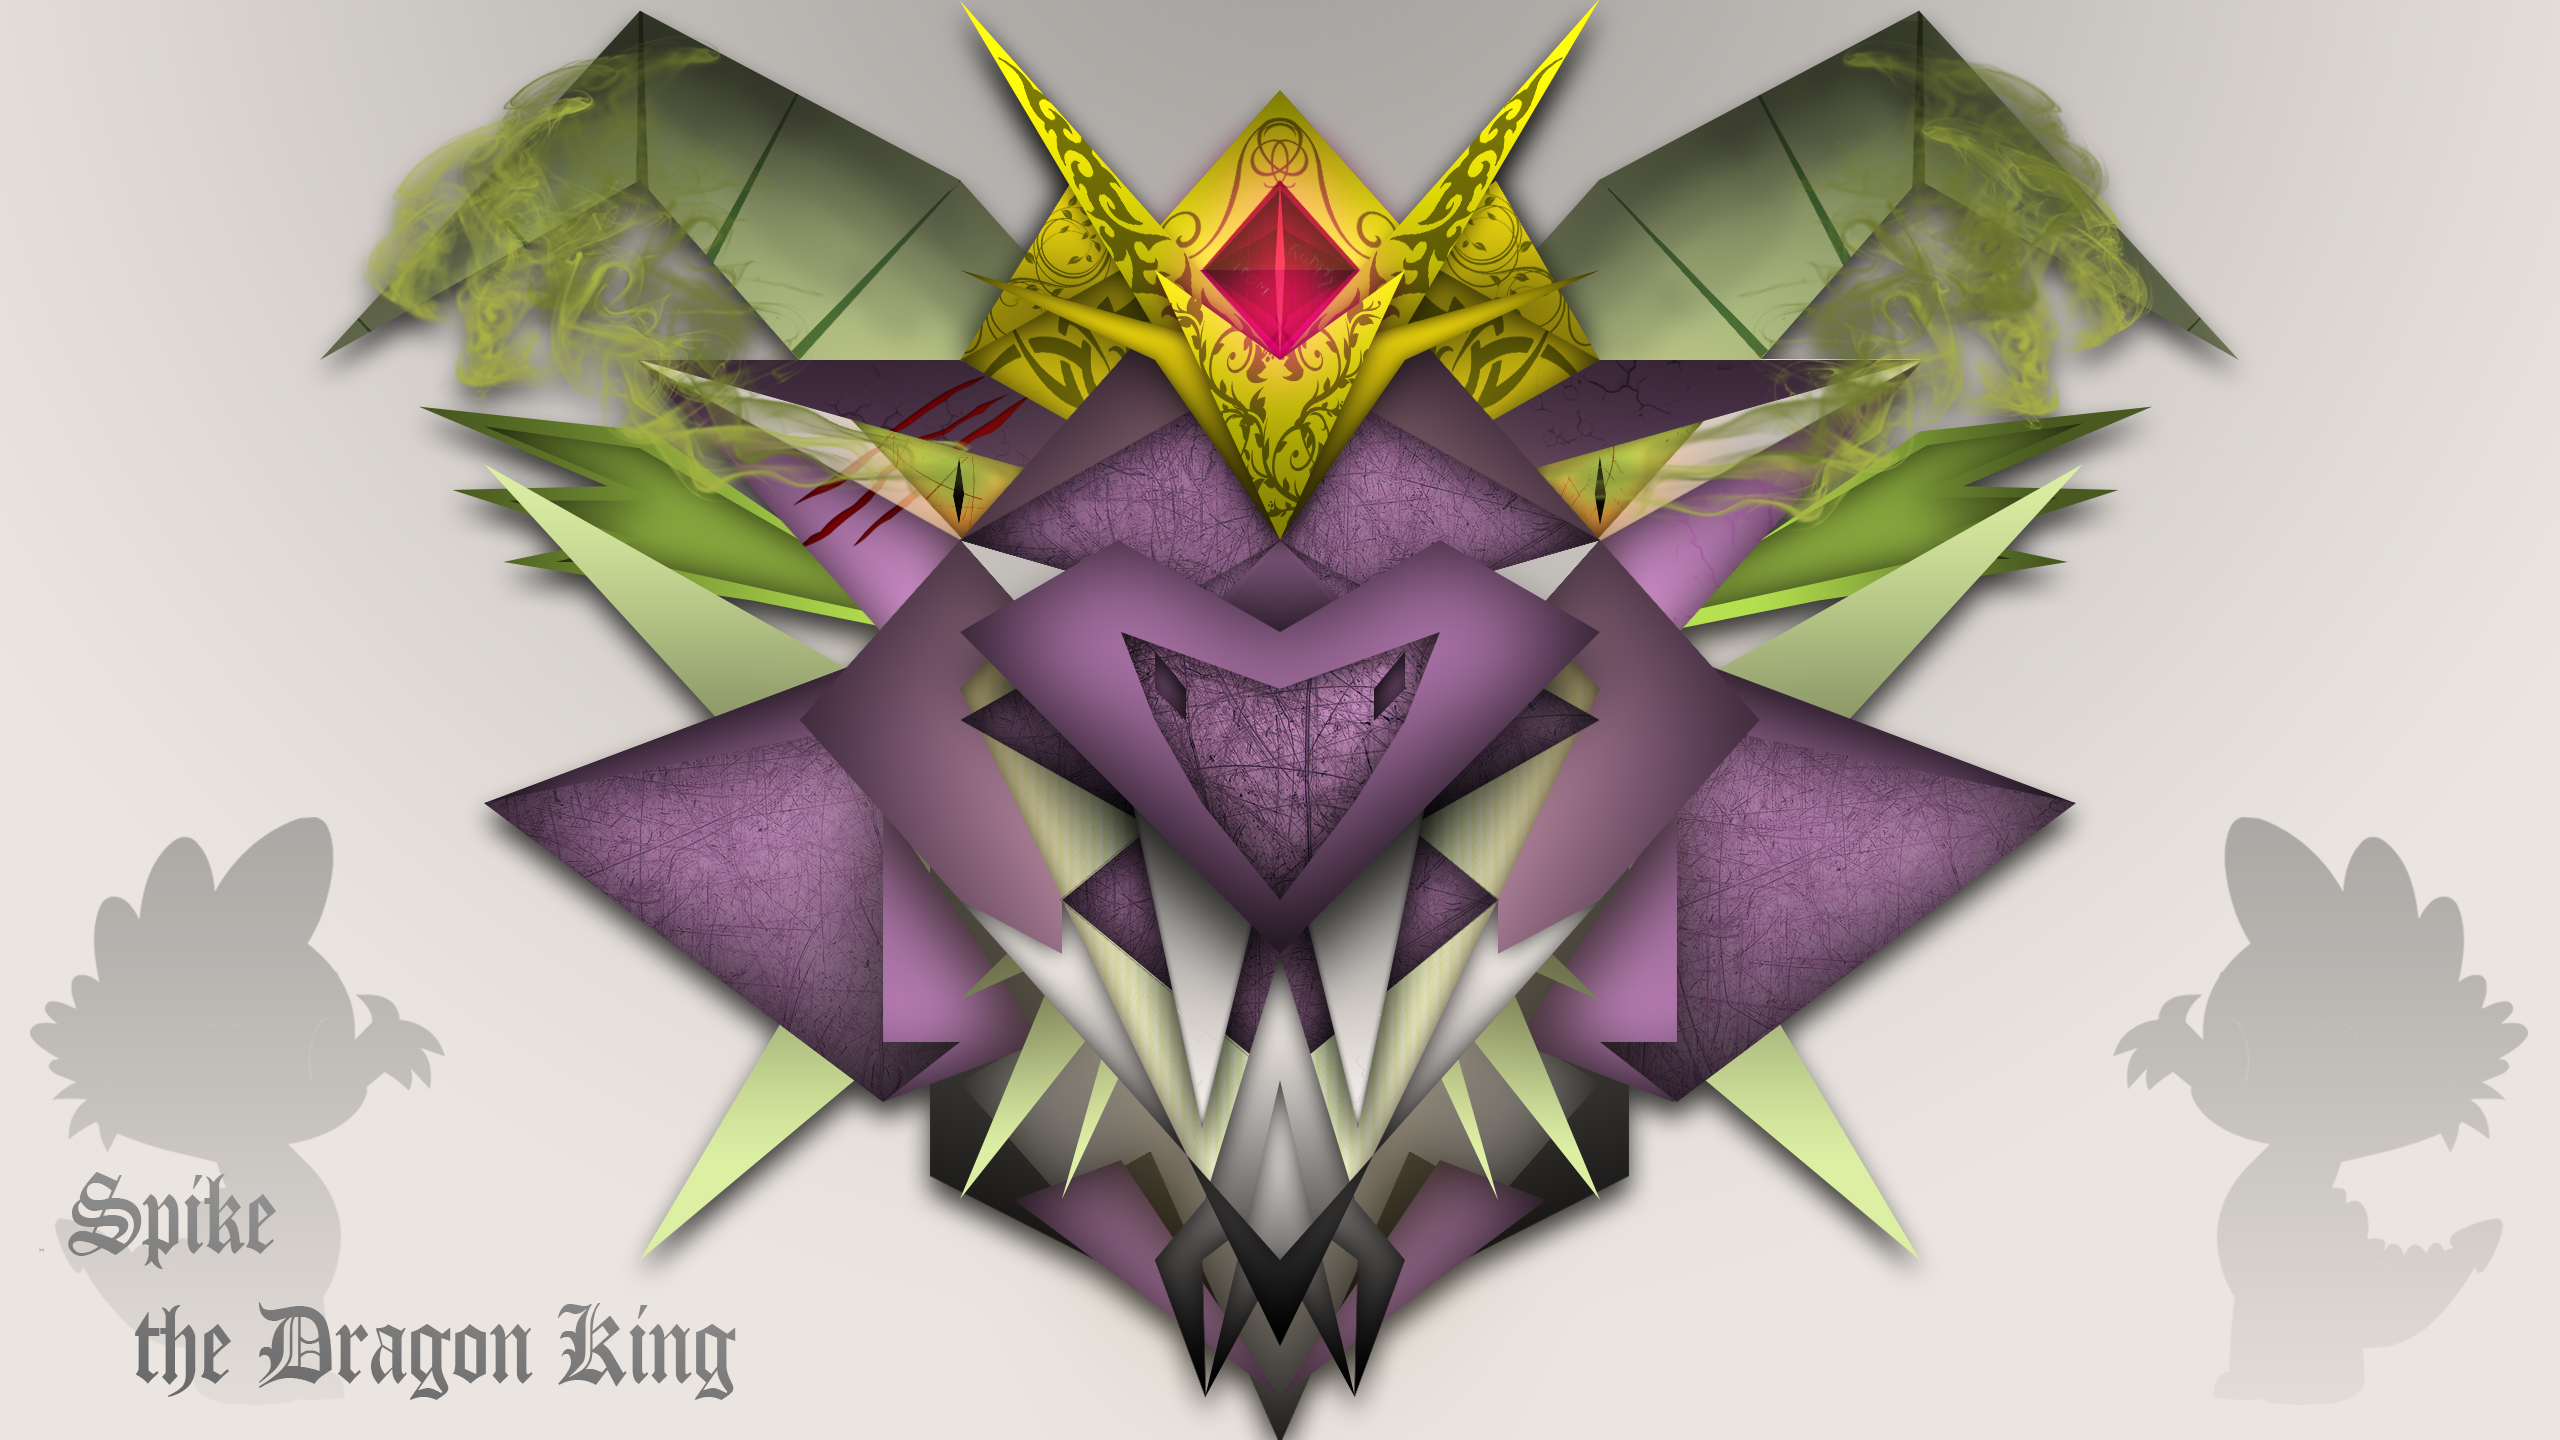 Spike the Dragon King wallpaper by skrayp